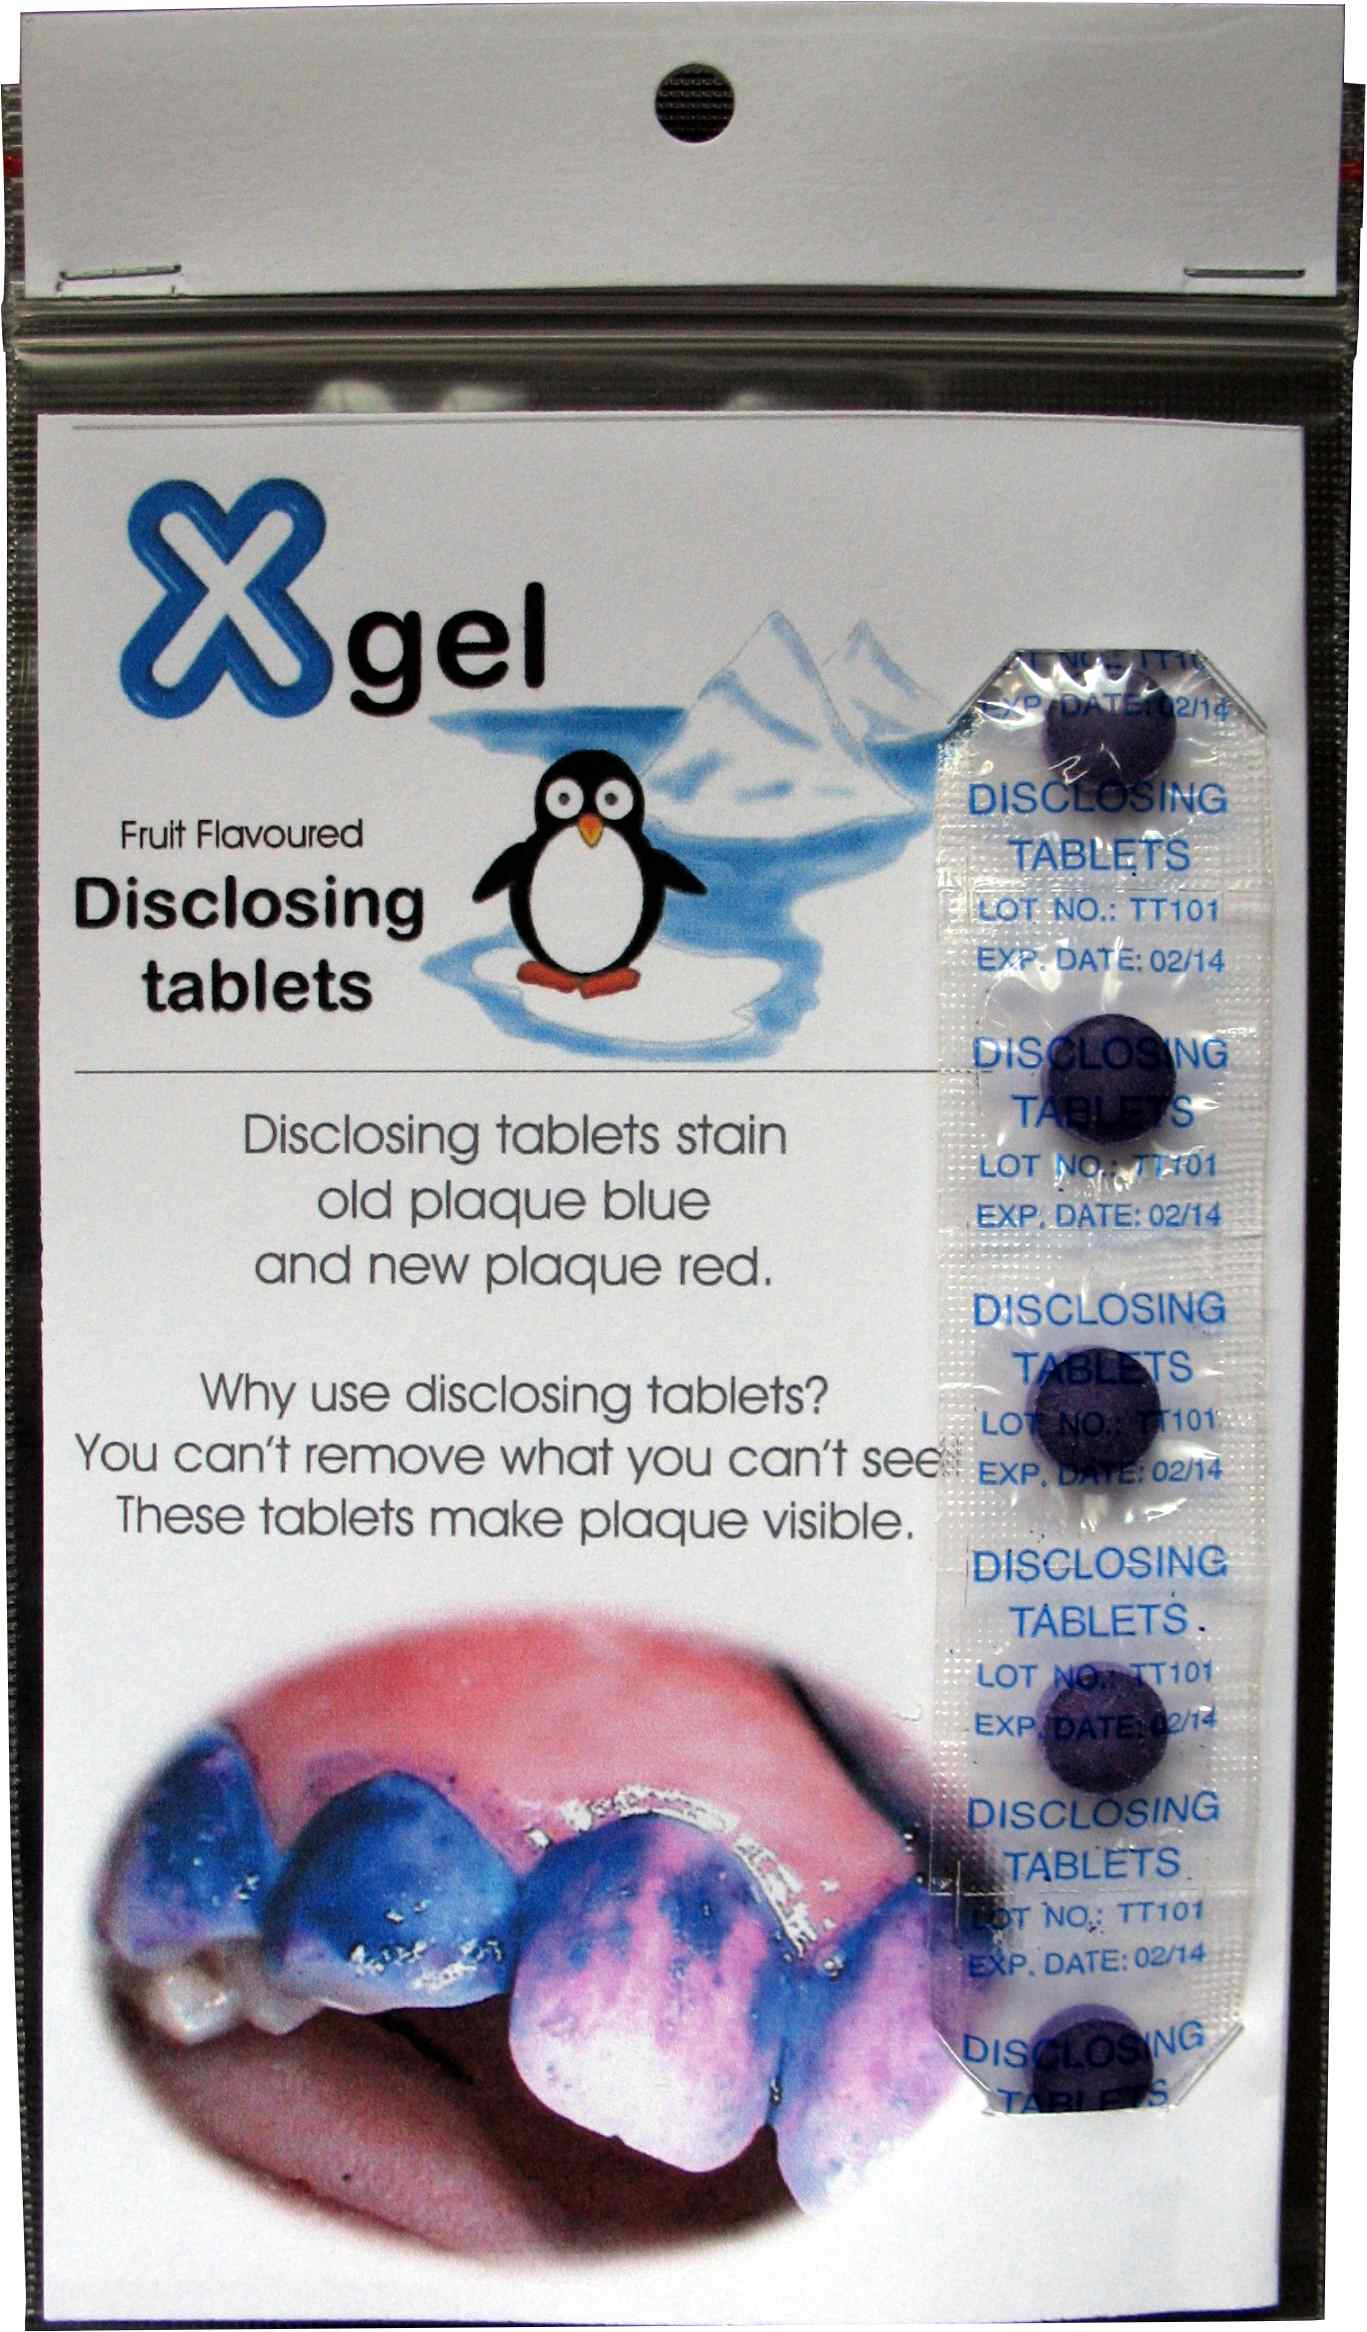 Disclosing tablets